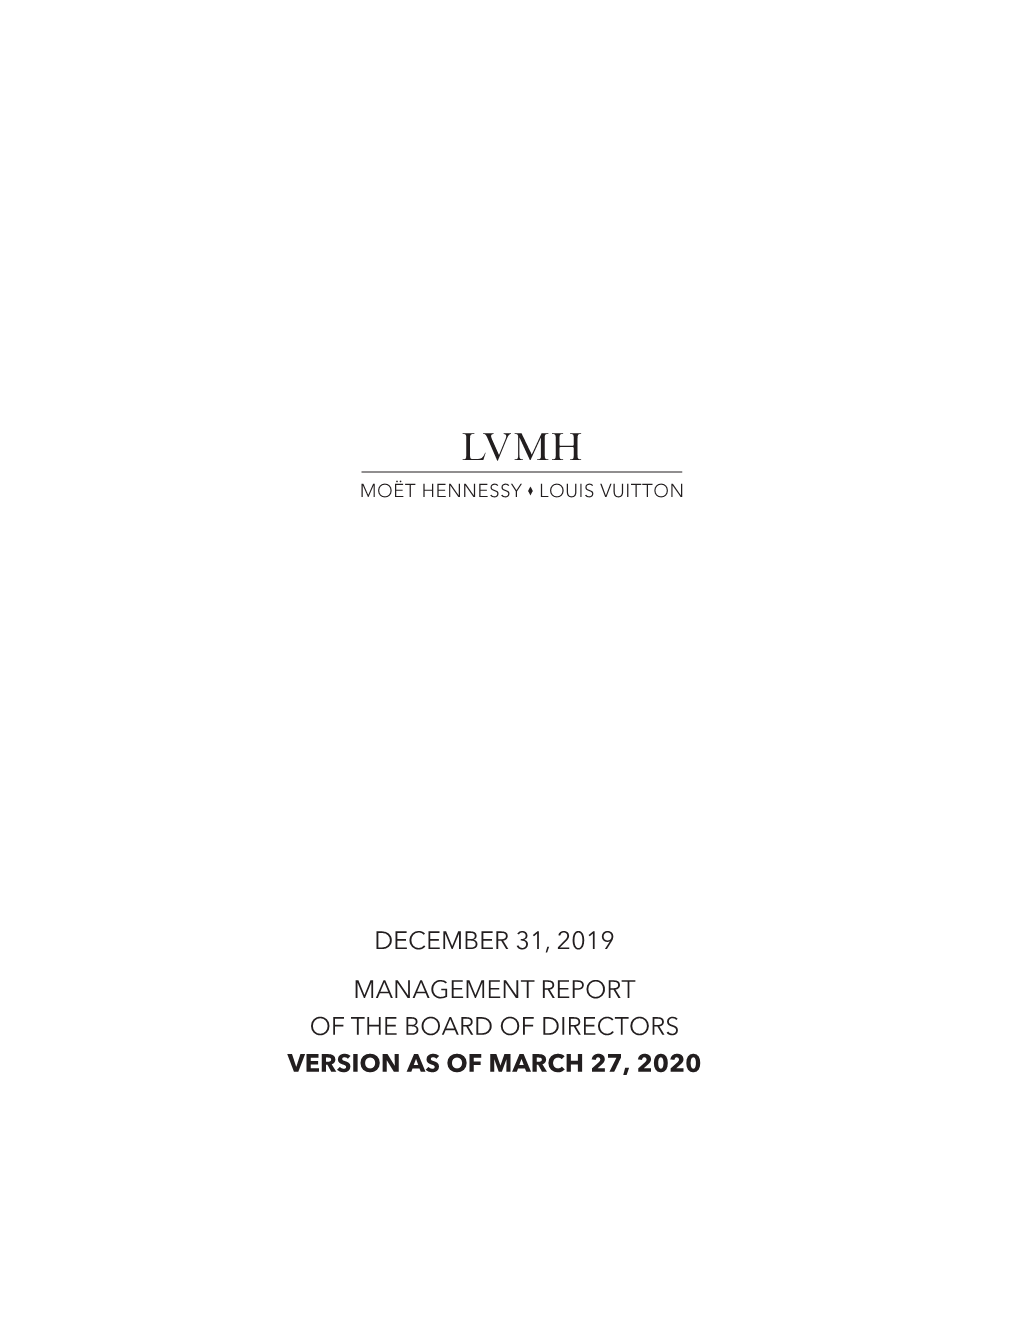 December 31, 2019 Management Report of the Board of Directors Version As of March 27, 2020 Contents